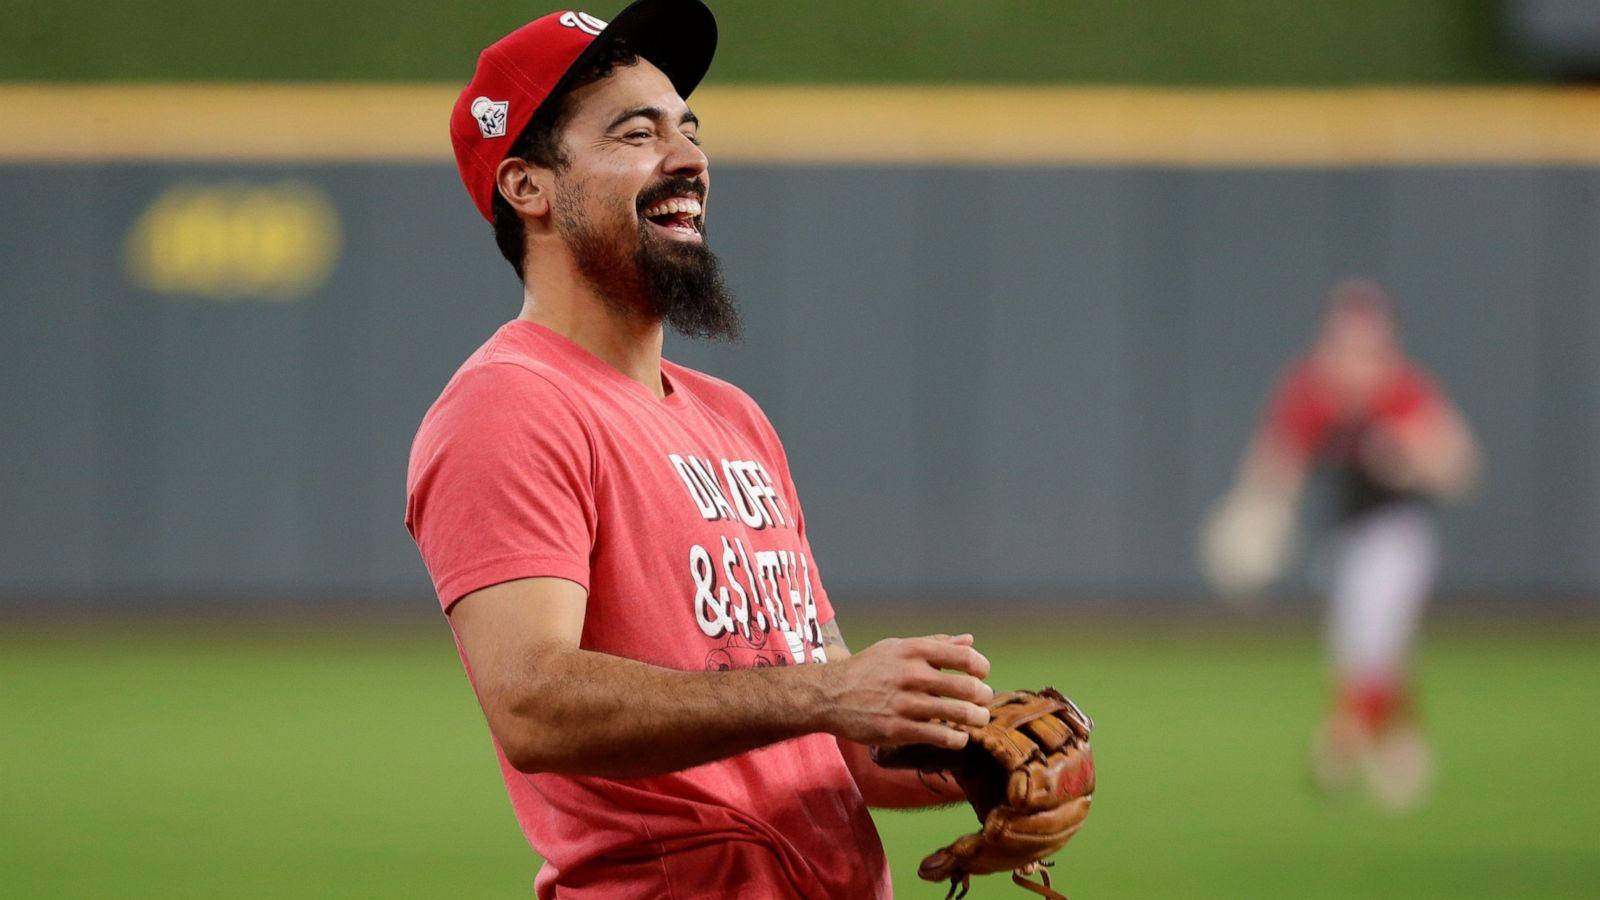 Anthony Rendon Laughing In Red Outfit Background